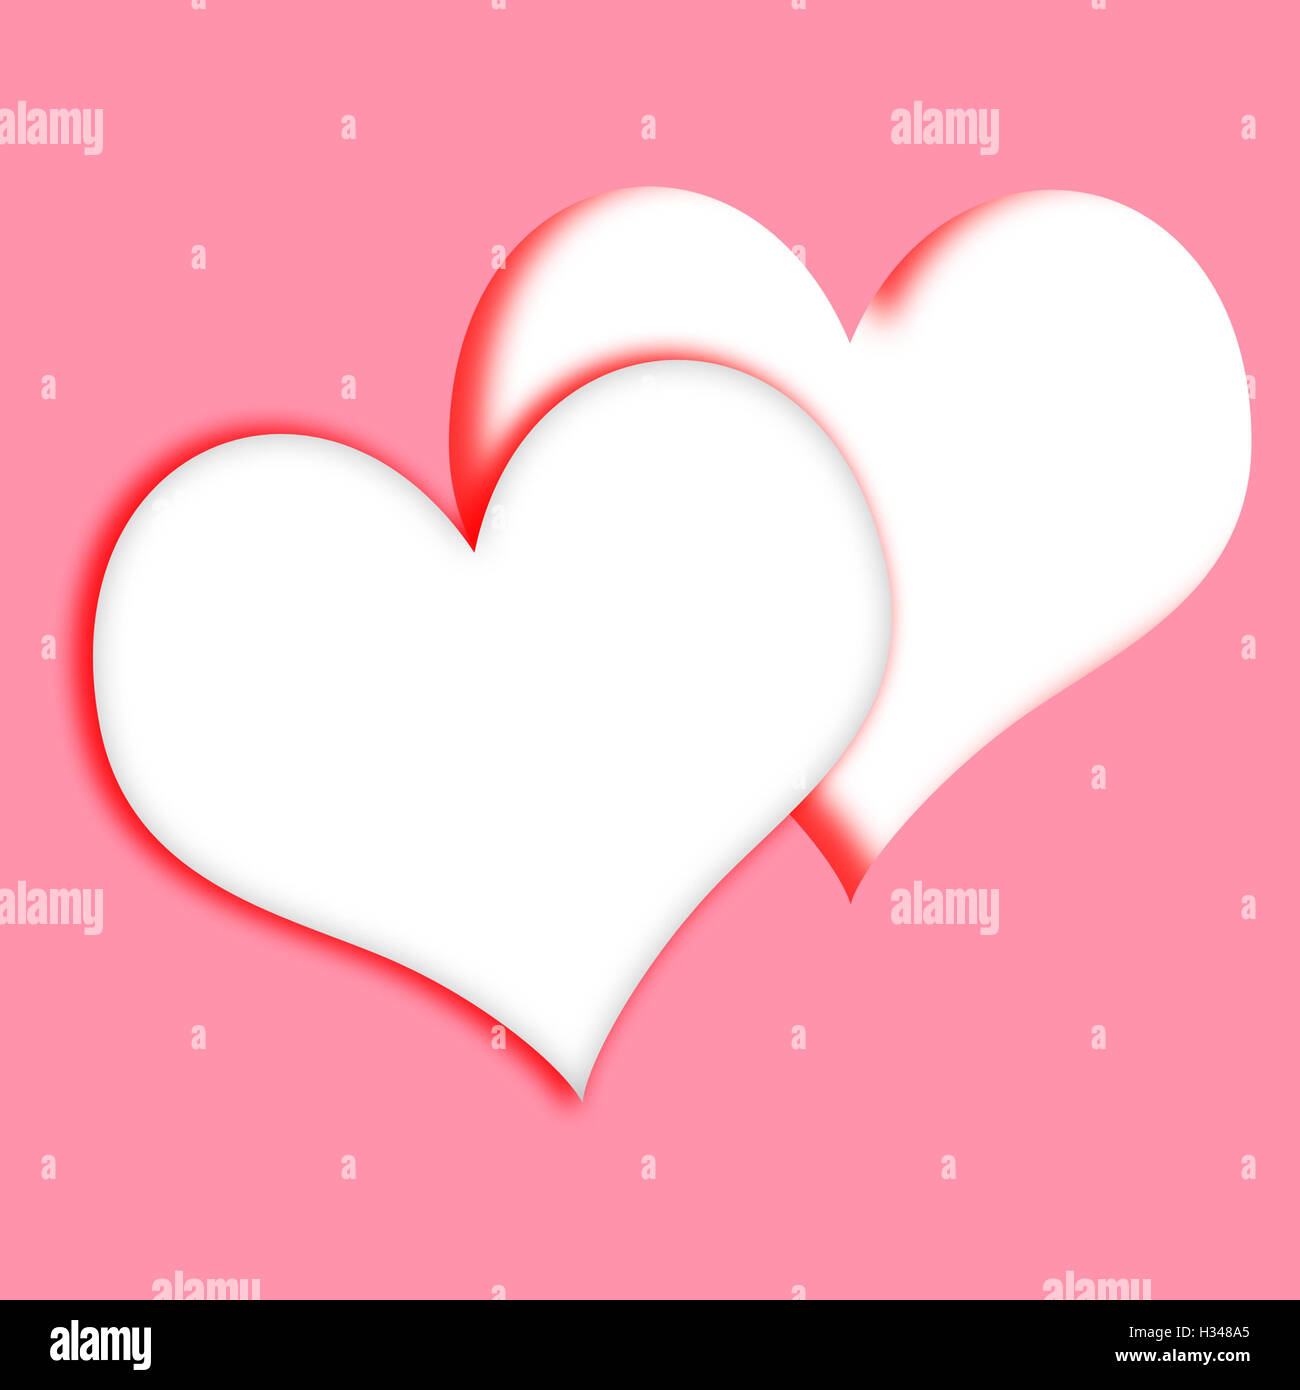 Intertwined Hearts Mean Dating Love And Relationships Stock Photo